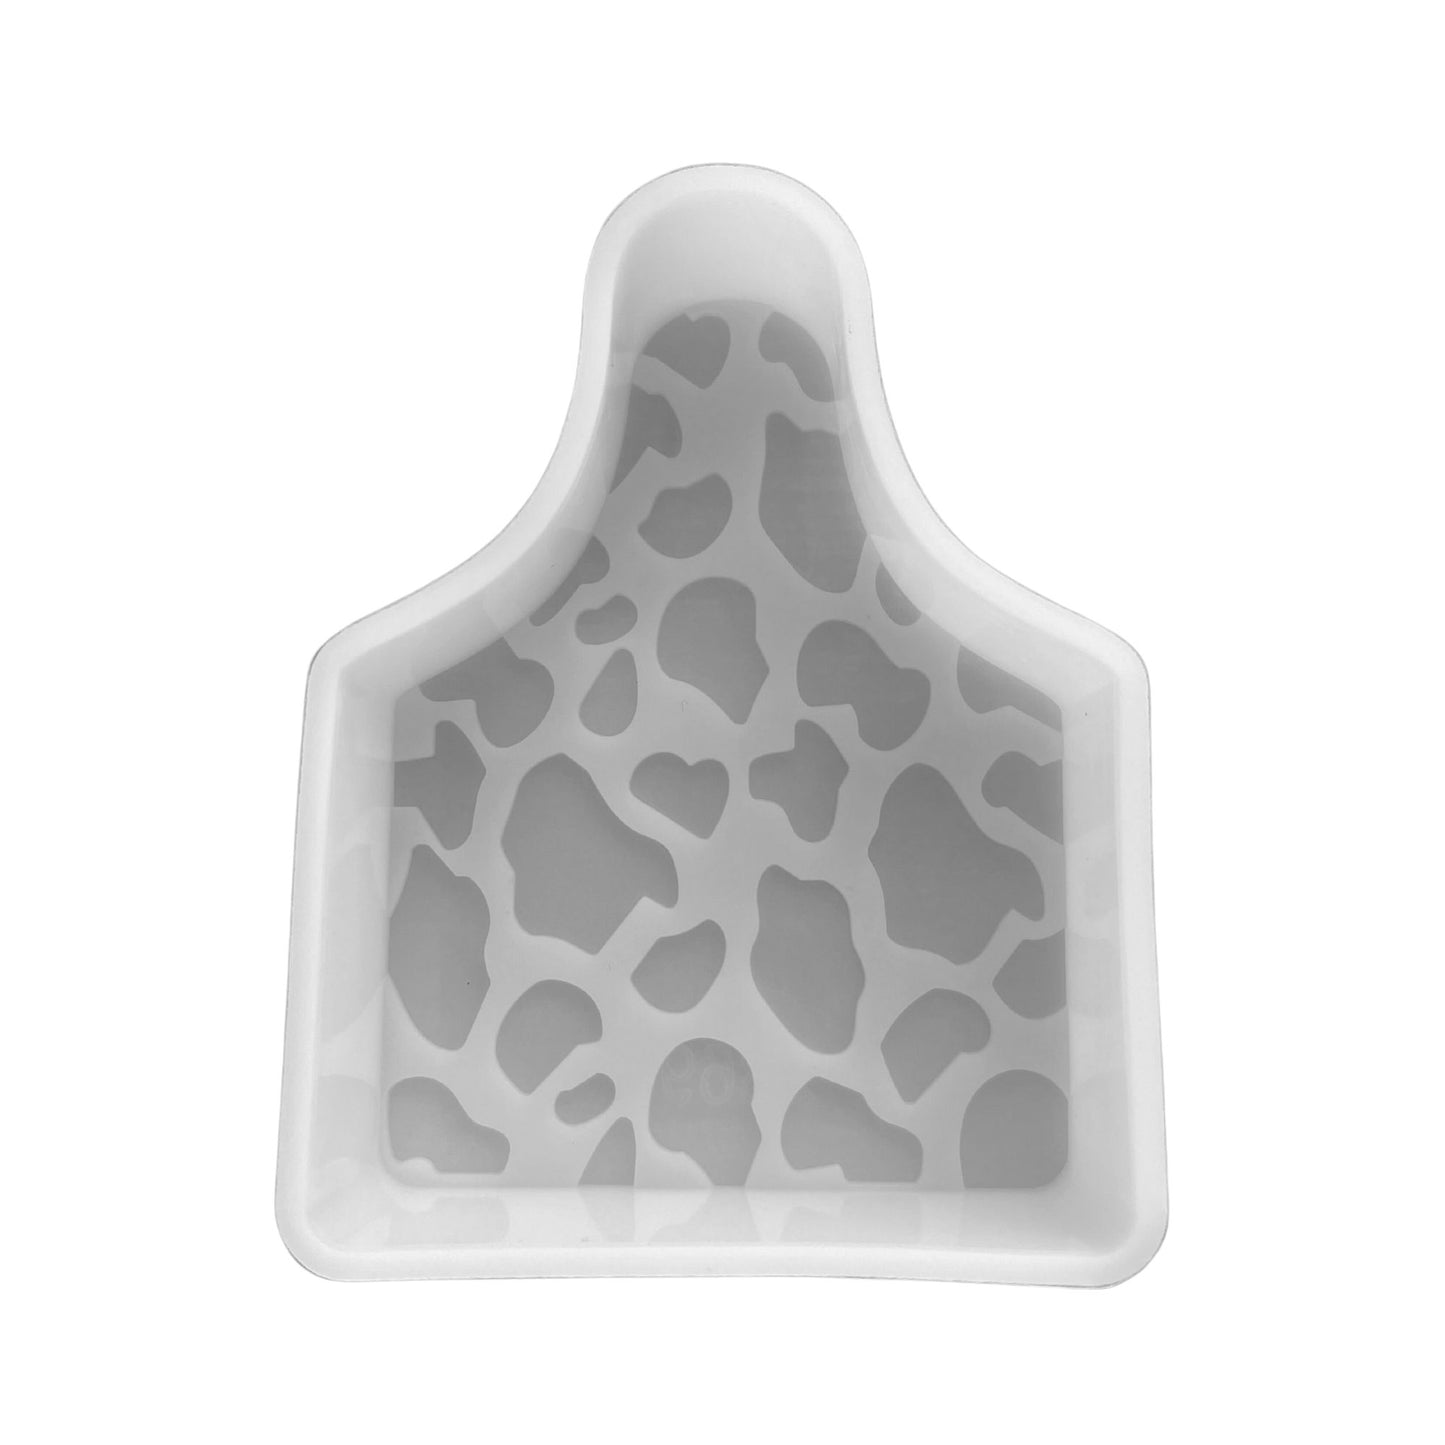 Cow Ear Tag Shaped with Cow Print Silicone Mold